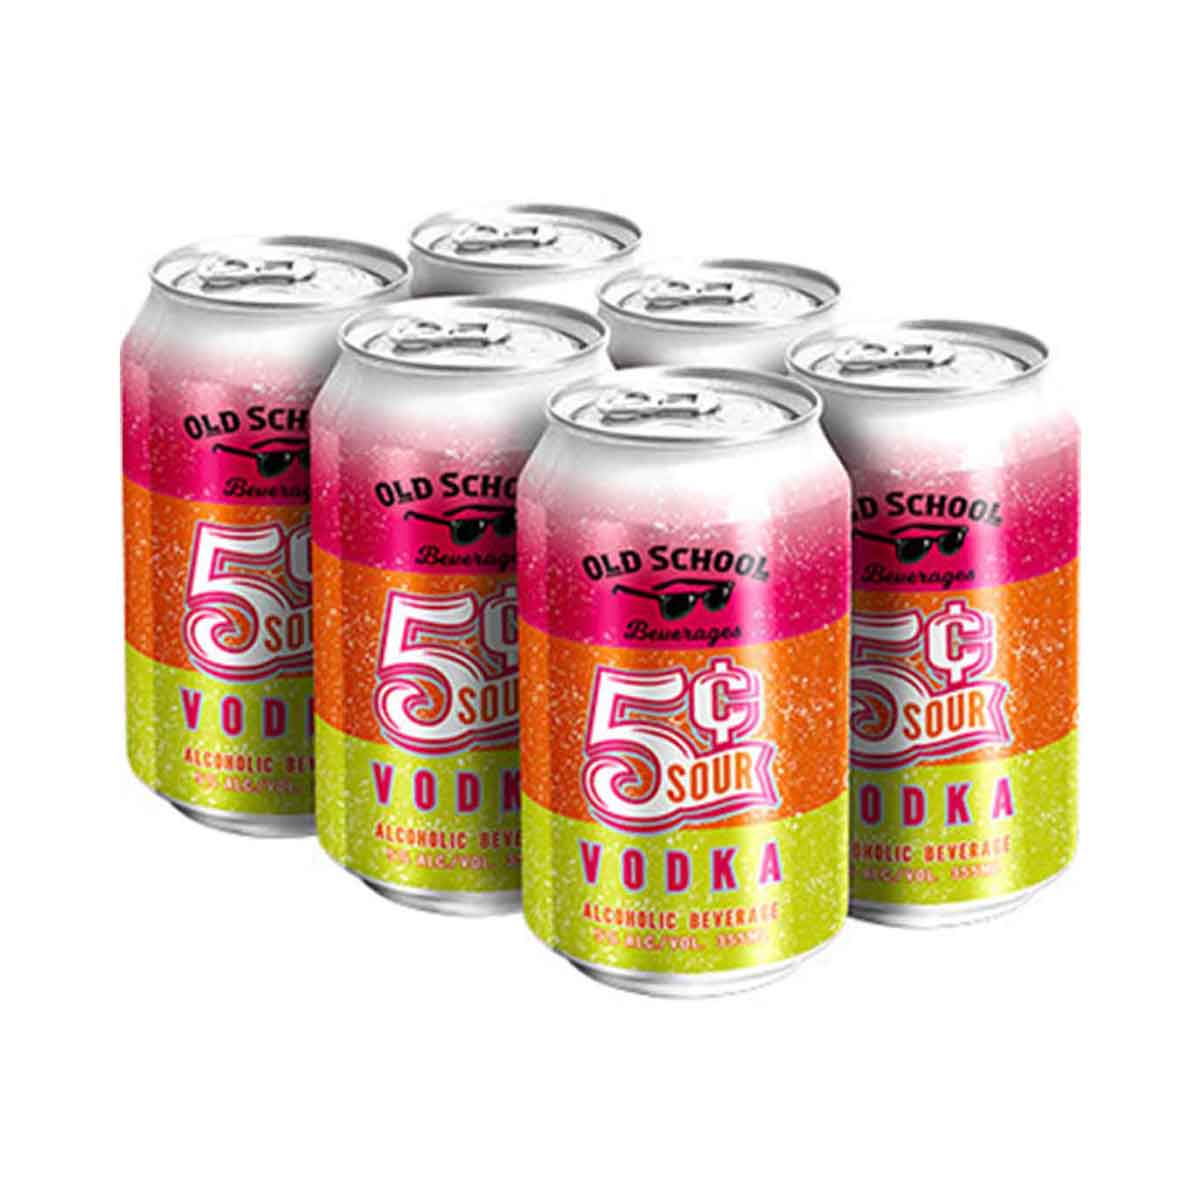 TAG Liquor Stores BC-OLD SCHOOL 5 CENT SOUR 6 CANS